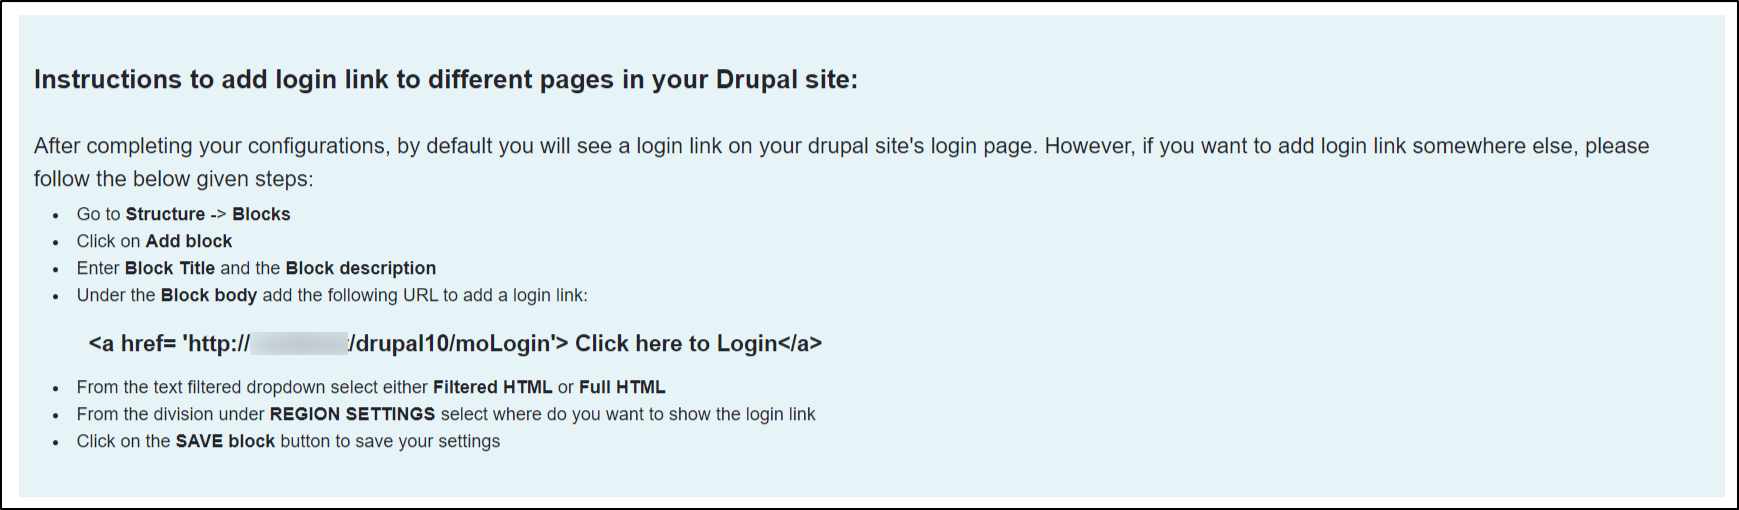 Drupal OAuth SSO Login - Configure OAuth - Scroll down and see the instruction to add login link to different pages in your Drupal site